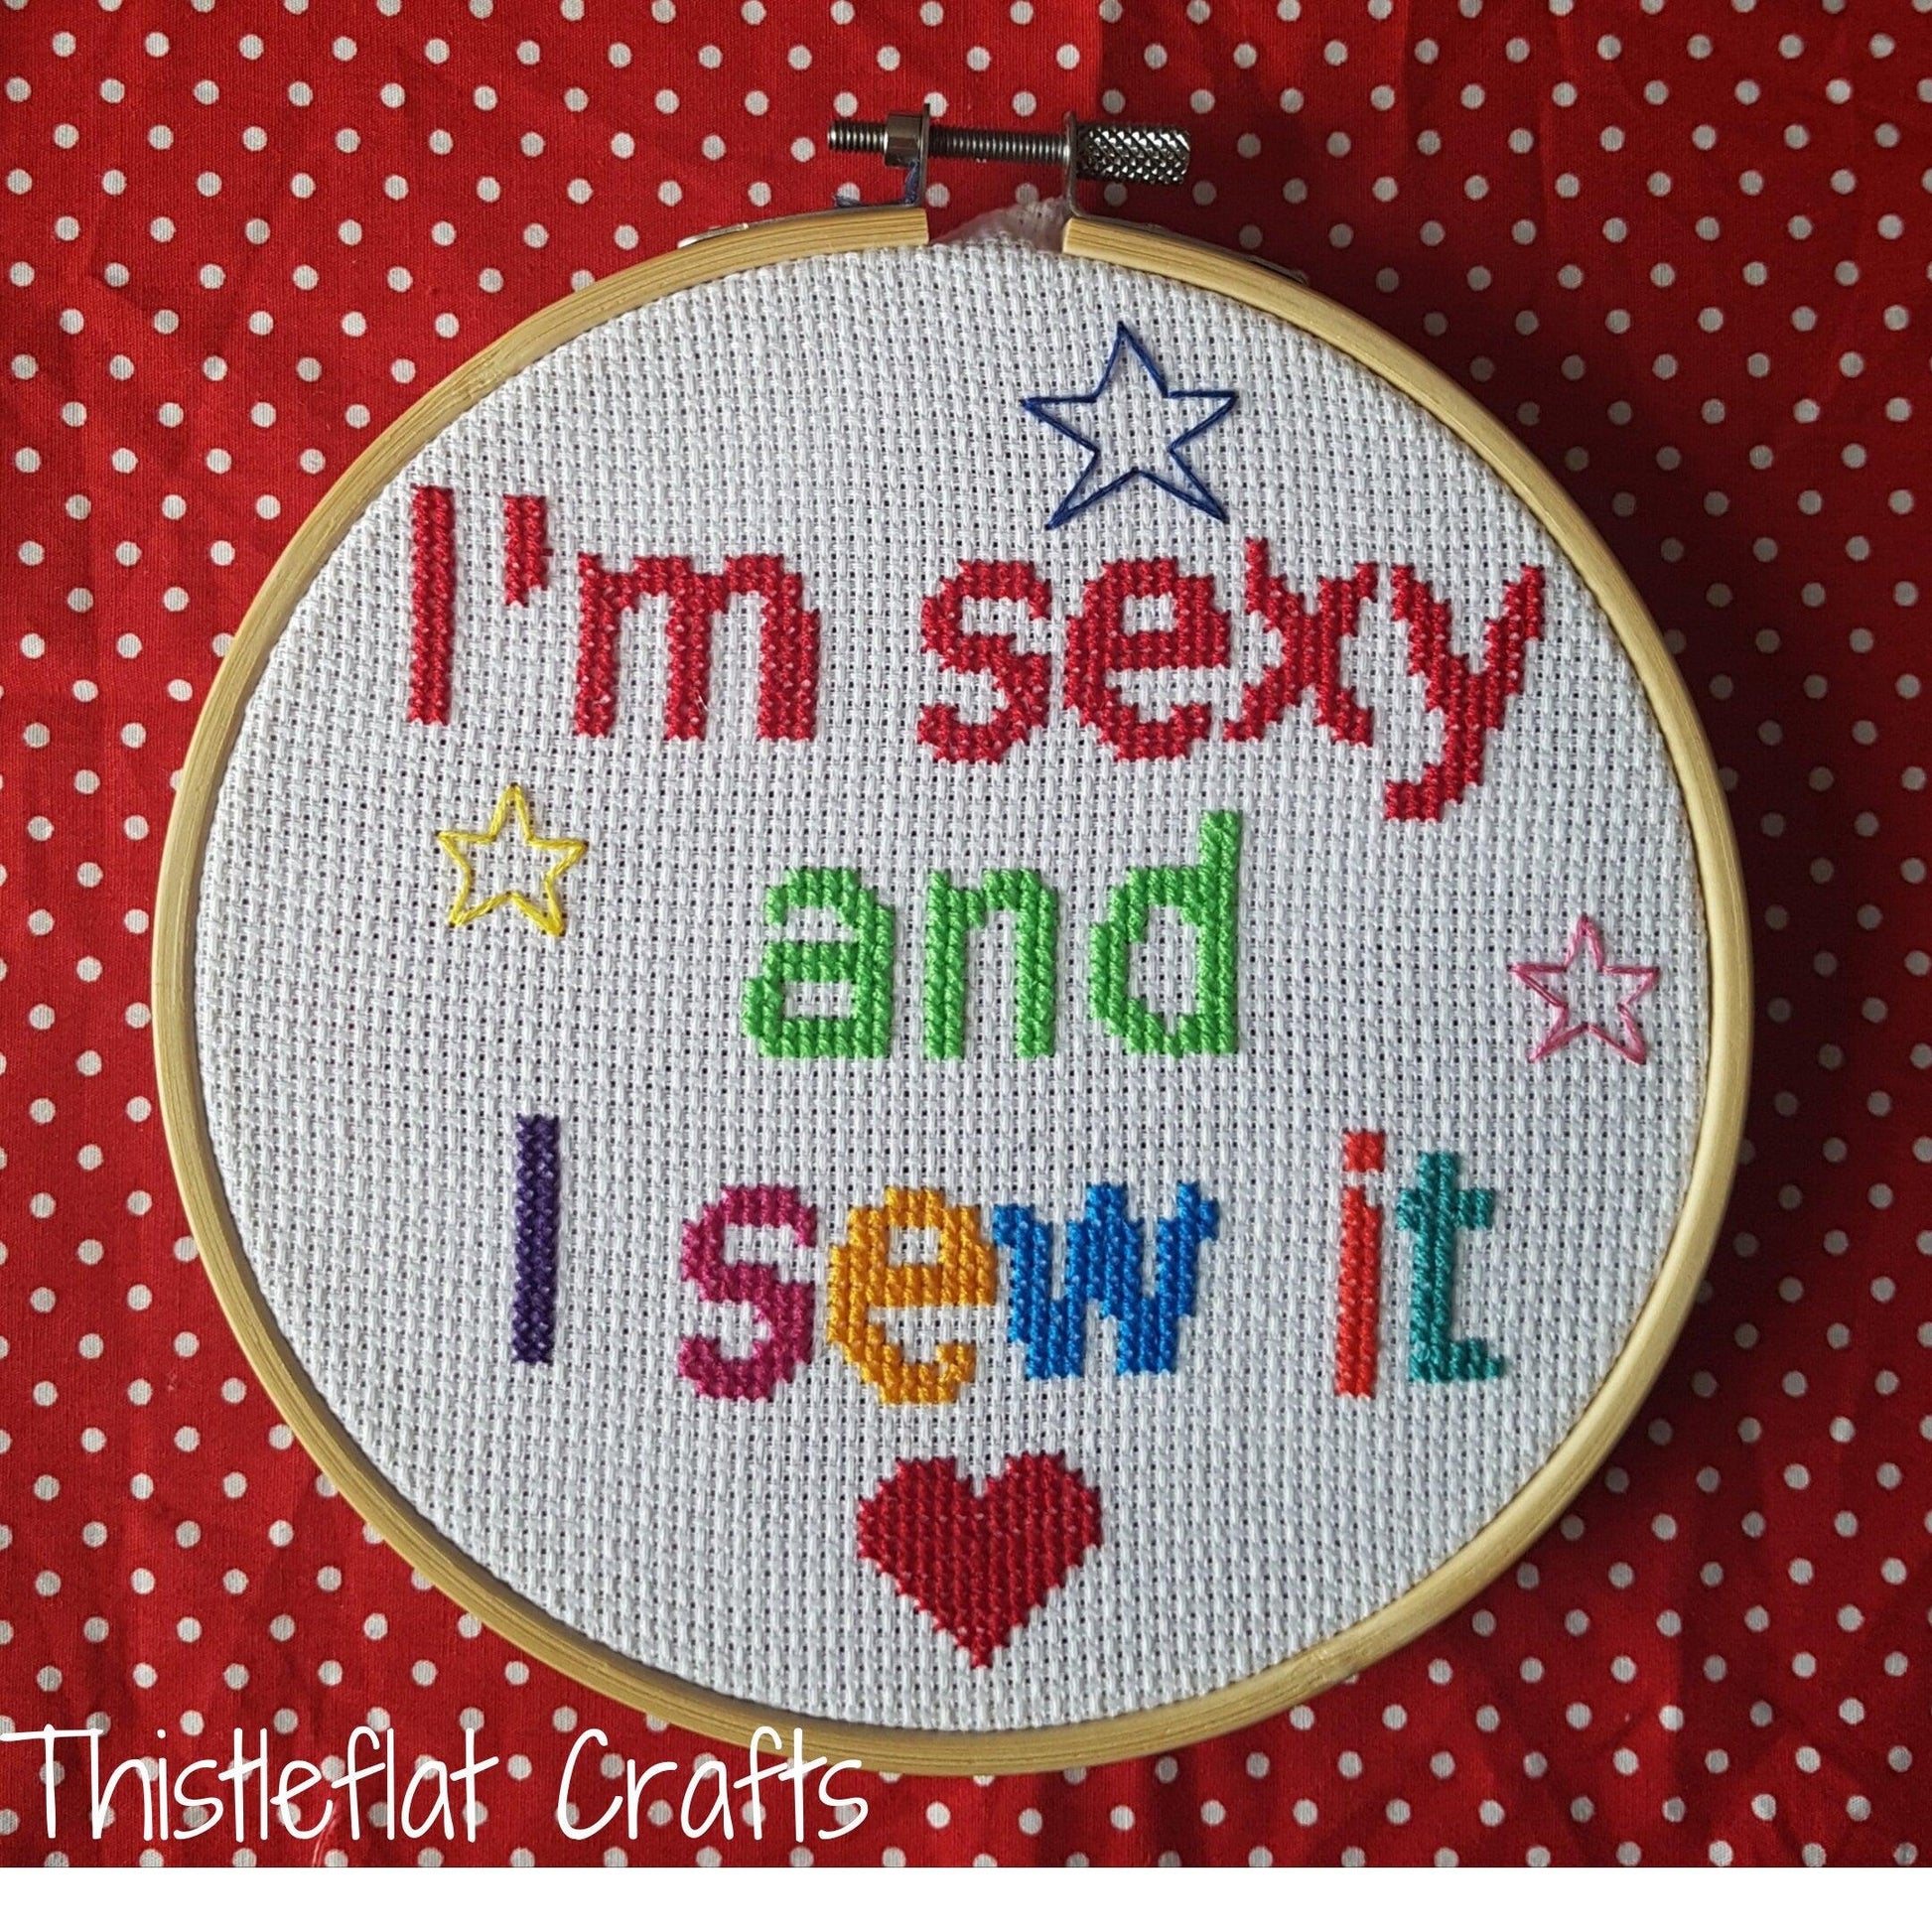 I'm sexy and I sew it, completed cross stitch quote - Thistleflat Crafts